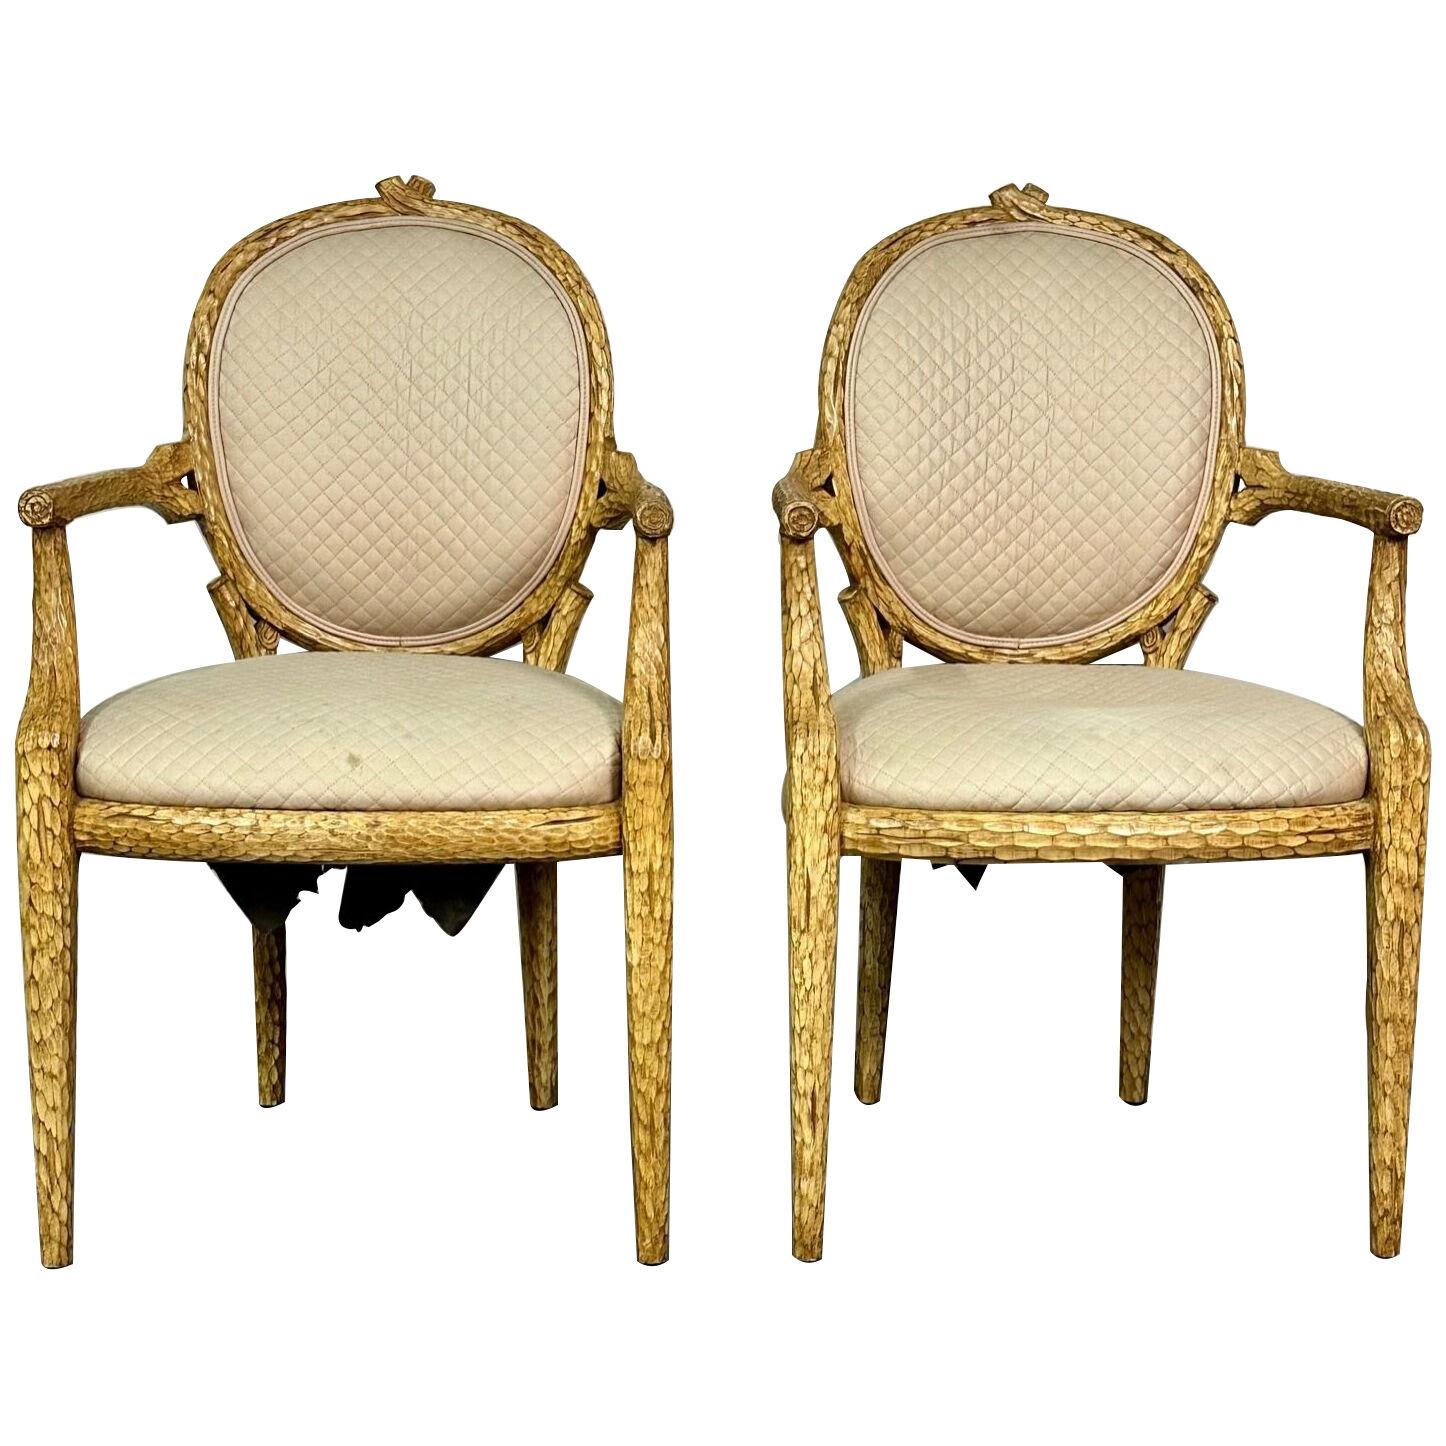 Pair of Modern American Designer Arm / Accent Chairs, Branch Design